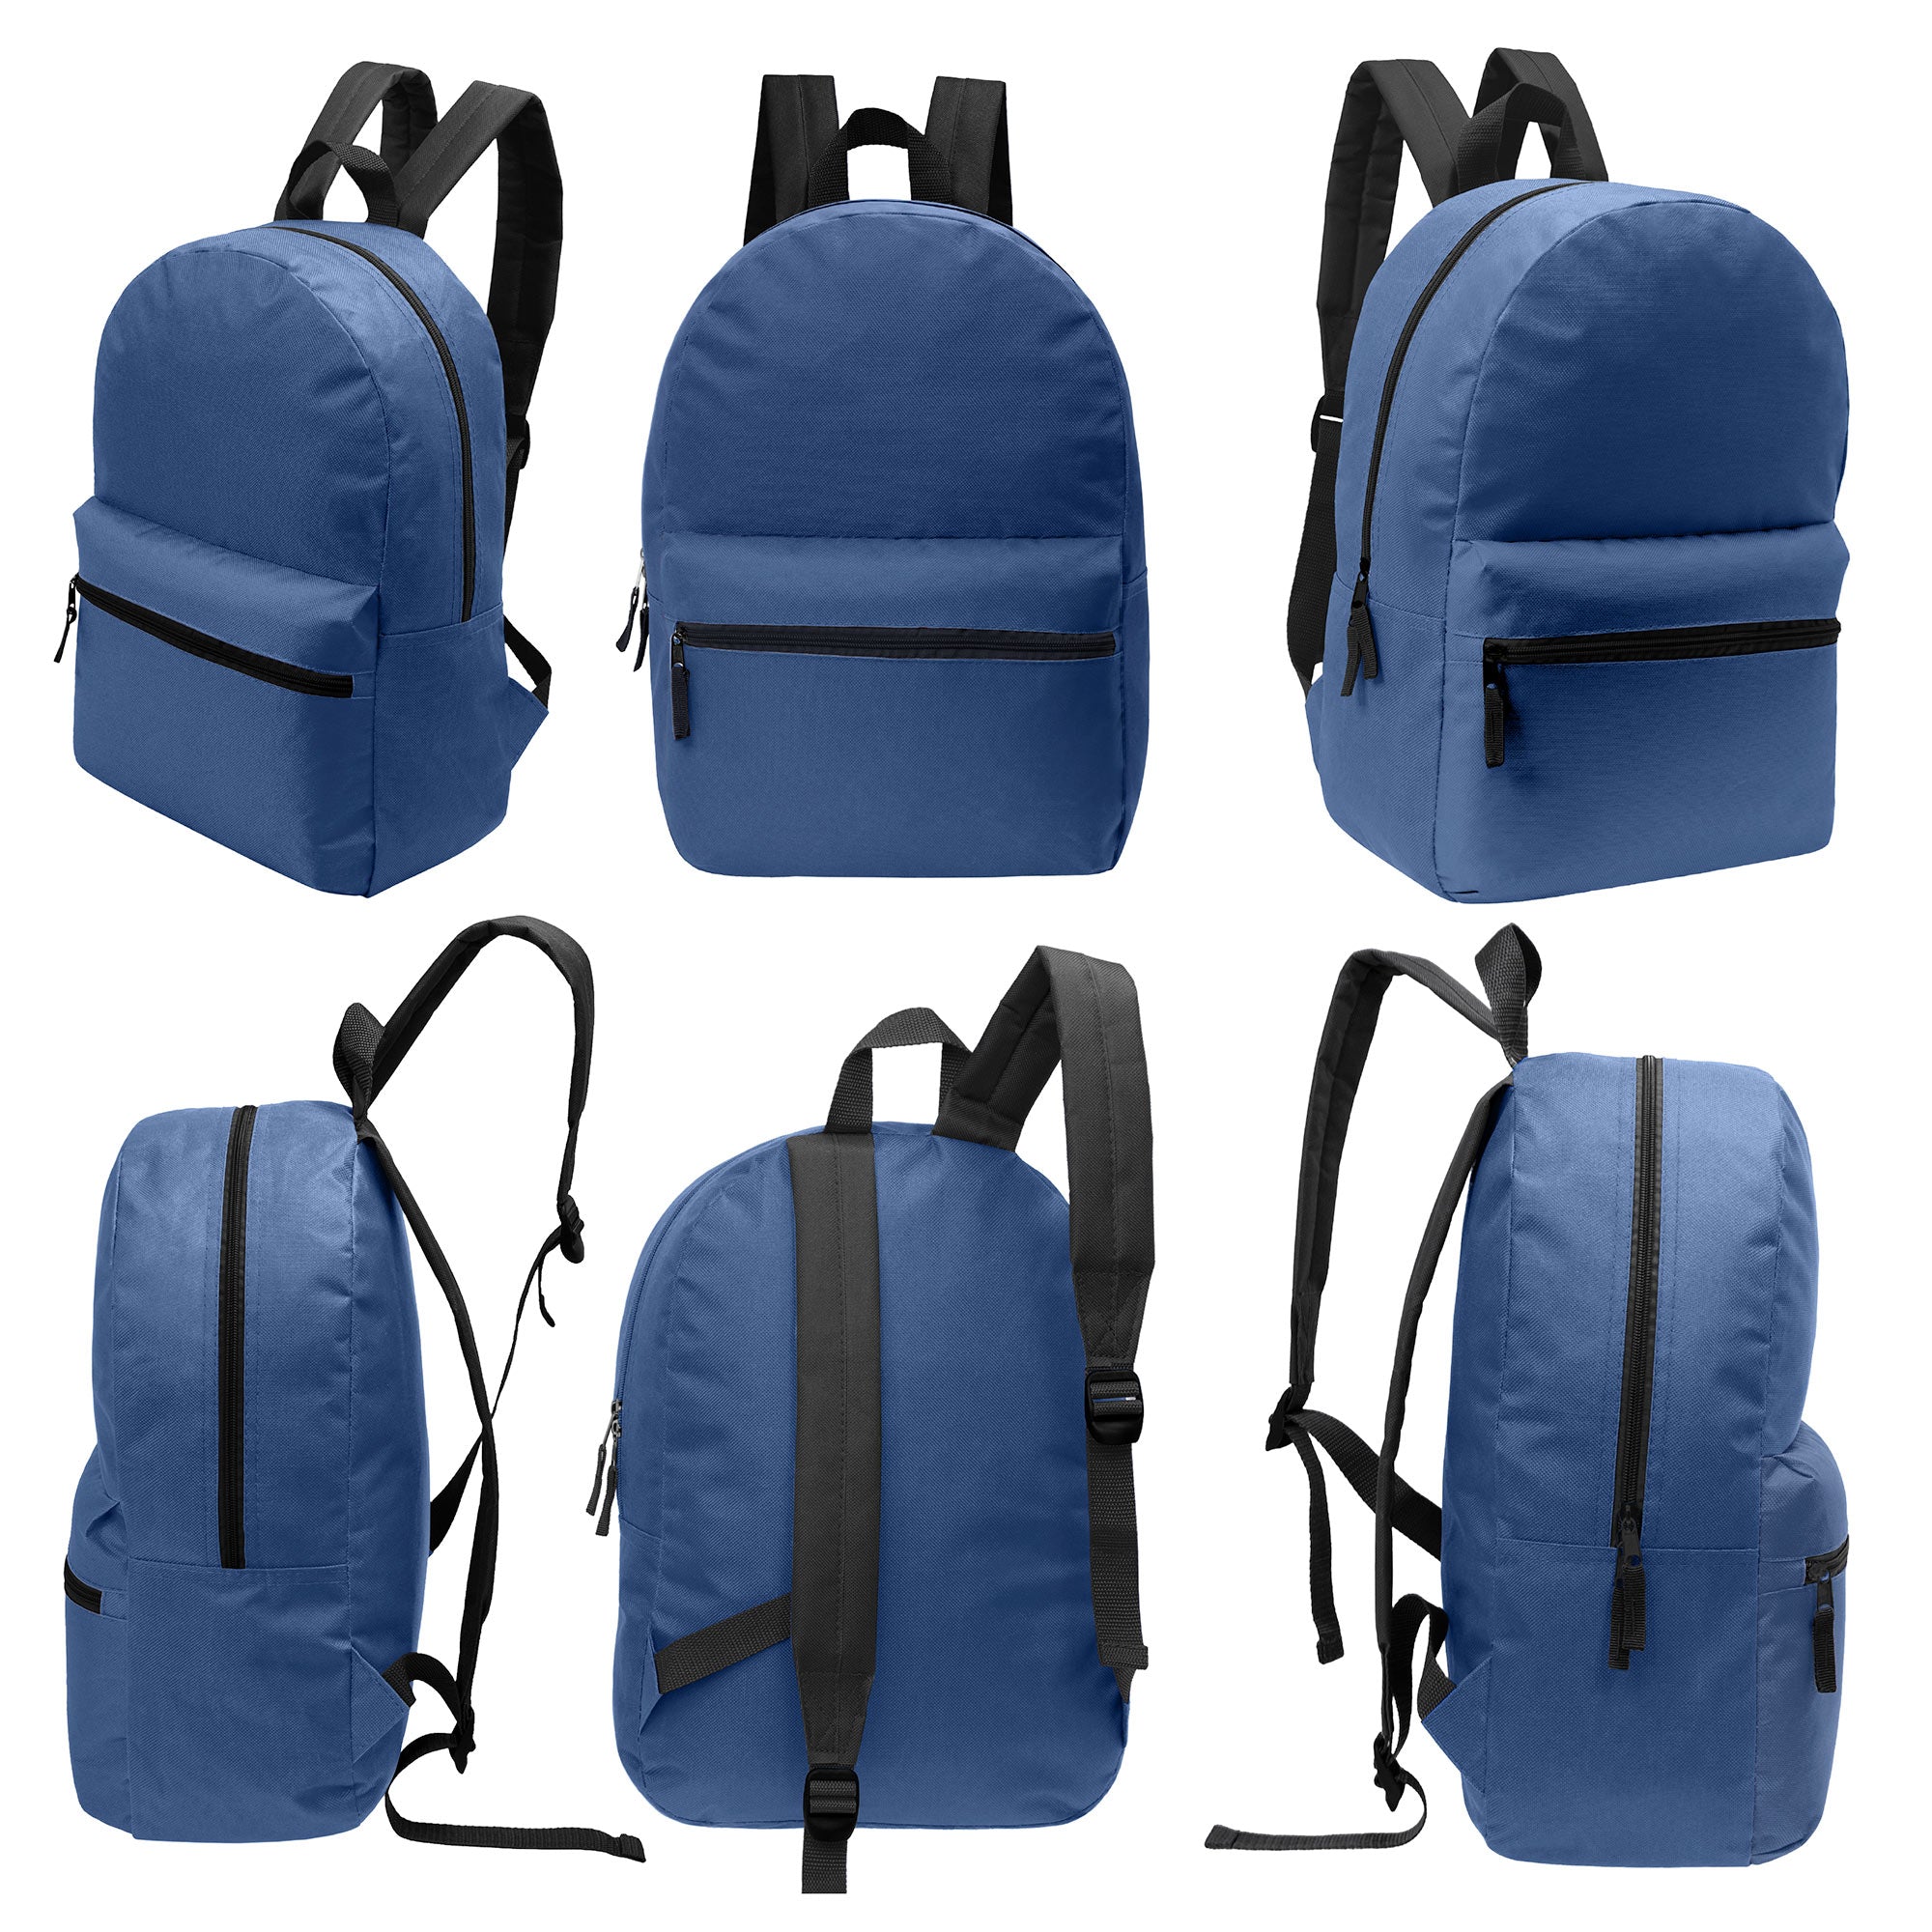 bulk 17 inch backpacks with the lowest price and free shipping BAPA-280-36